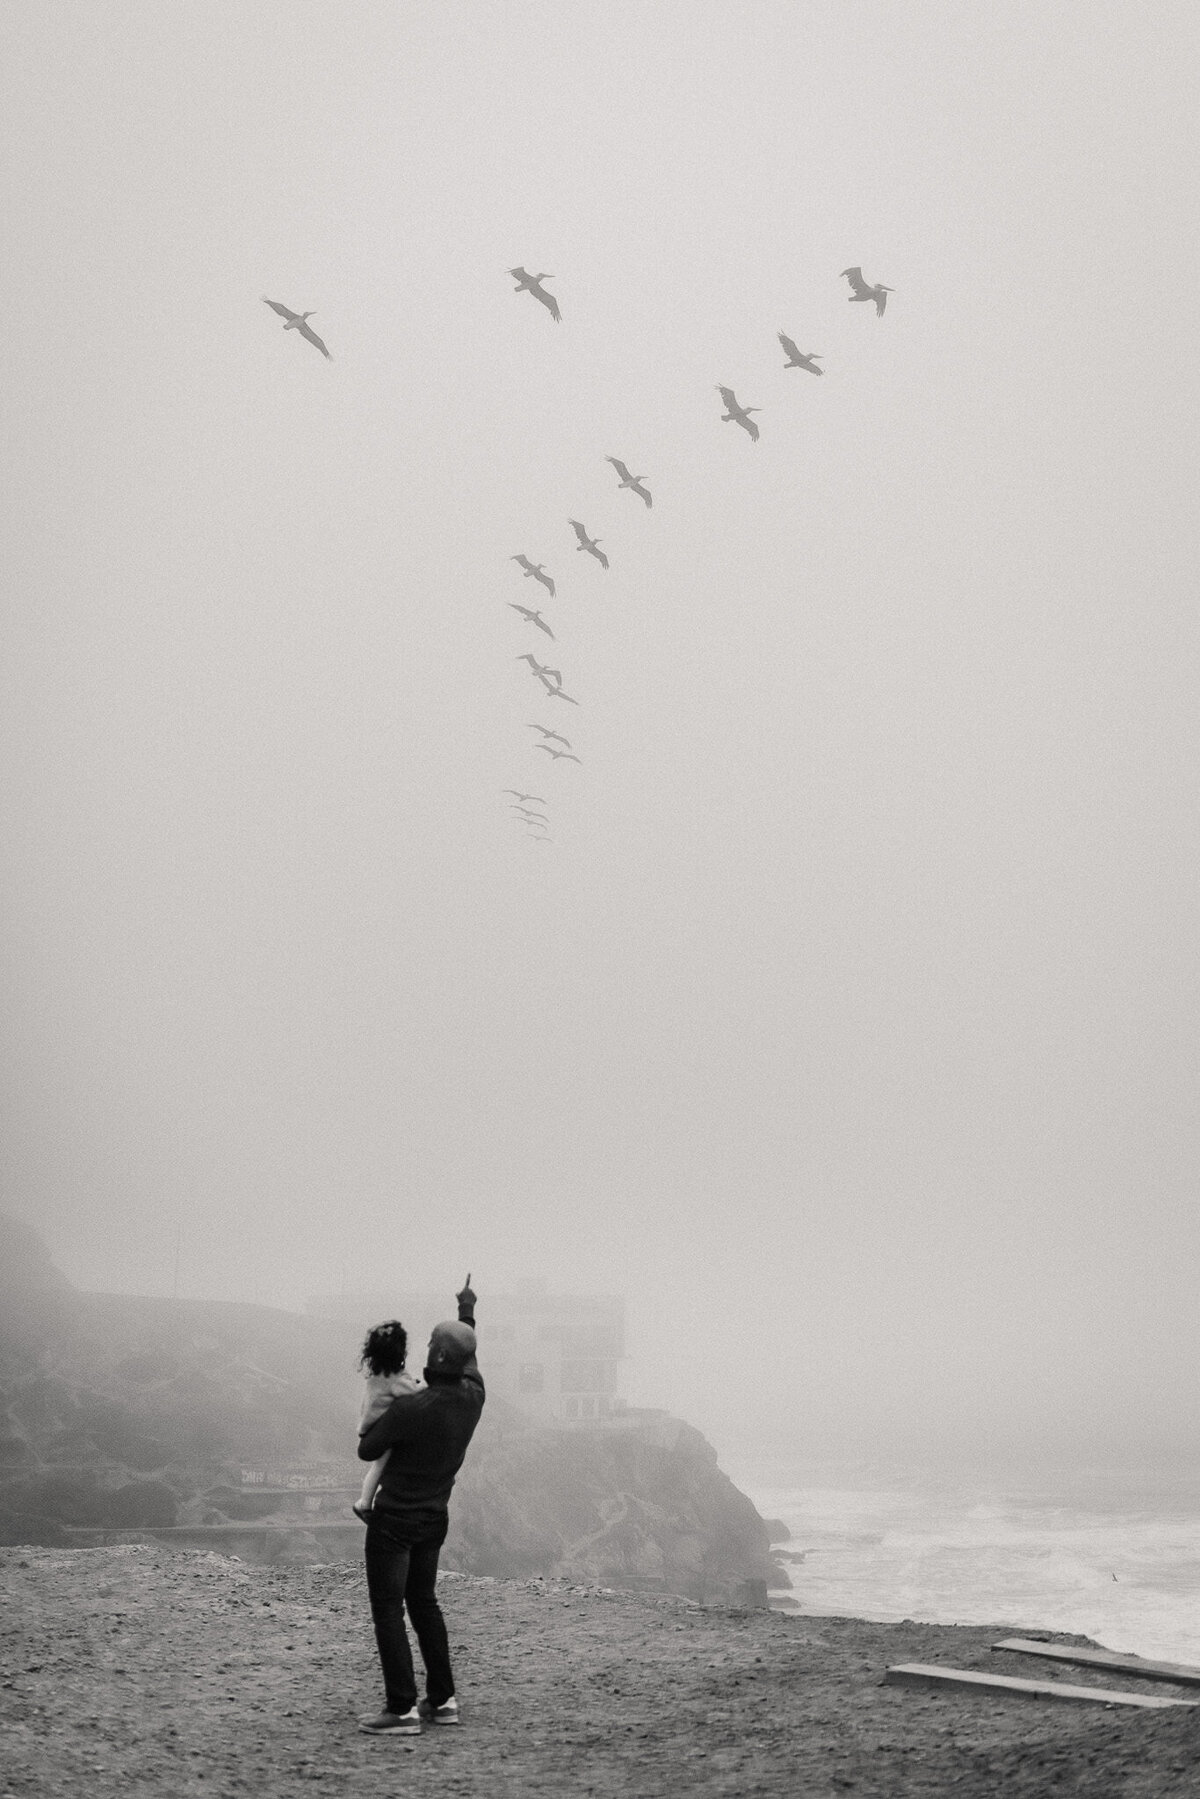 Documentary black and white photograph of Dad holding child and pointing at birds flying above on foggy coast